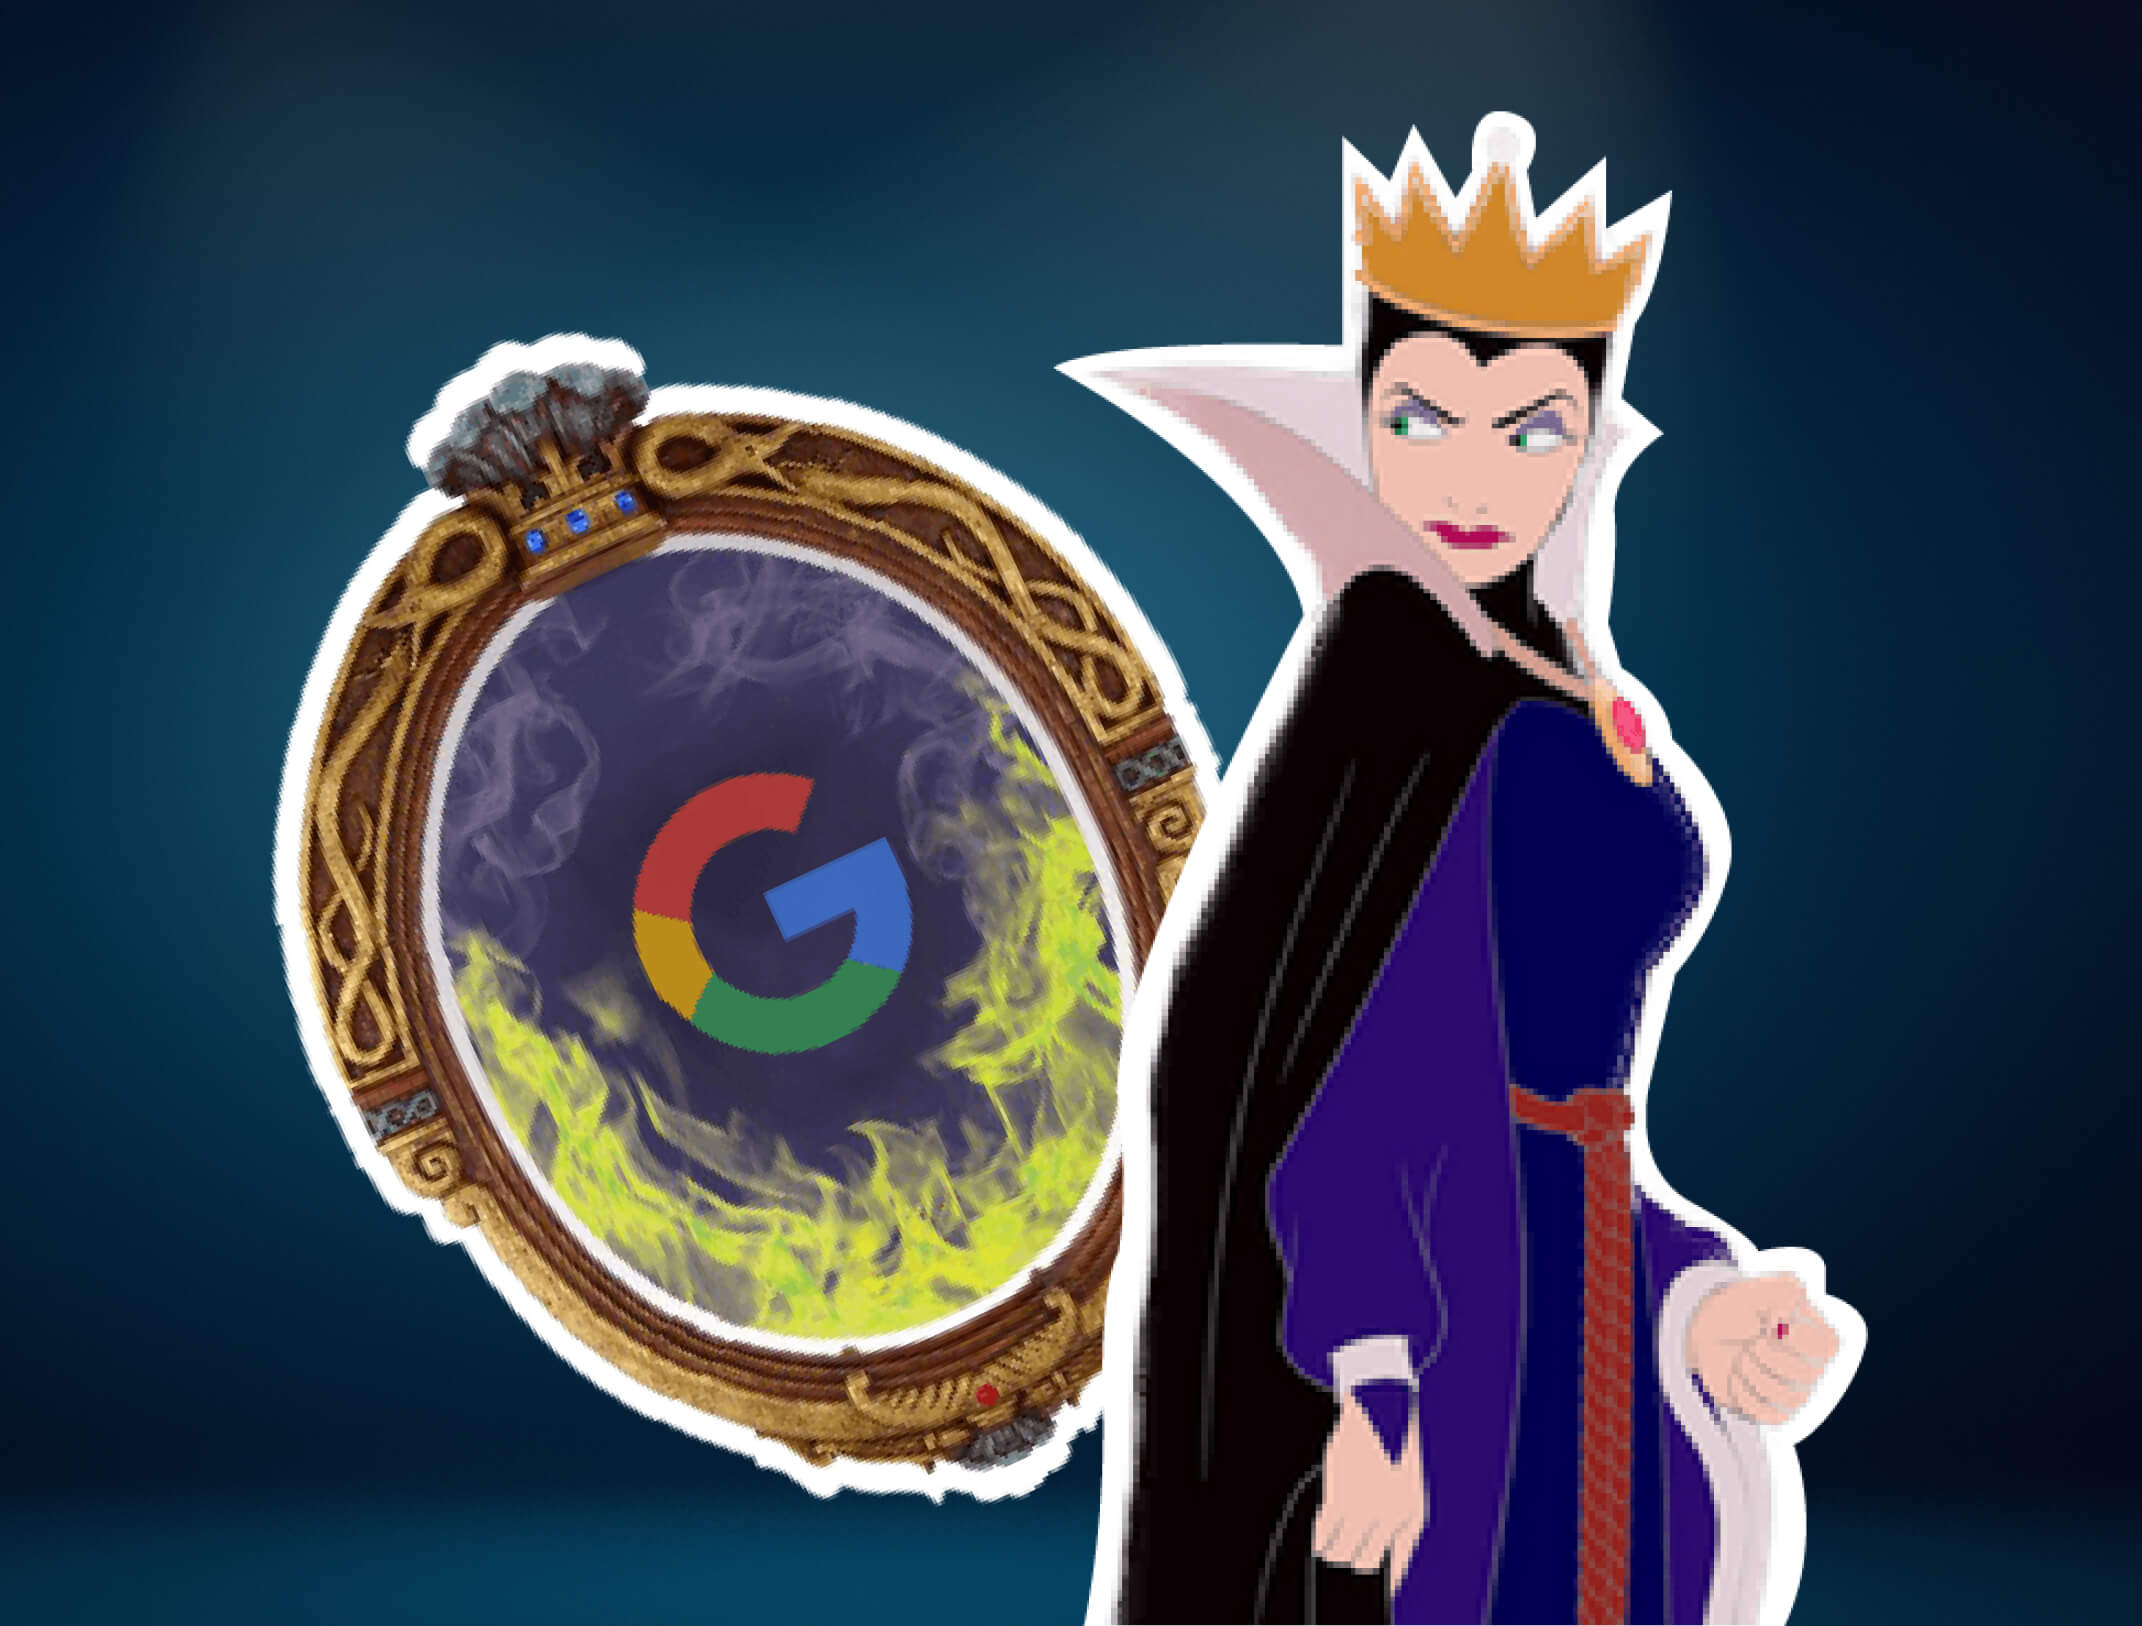 What if Snow White's Evil Queen Had Google Instead of a Mirror